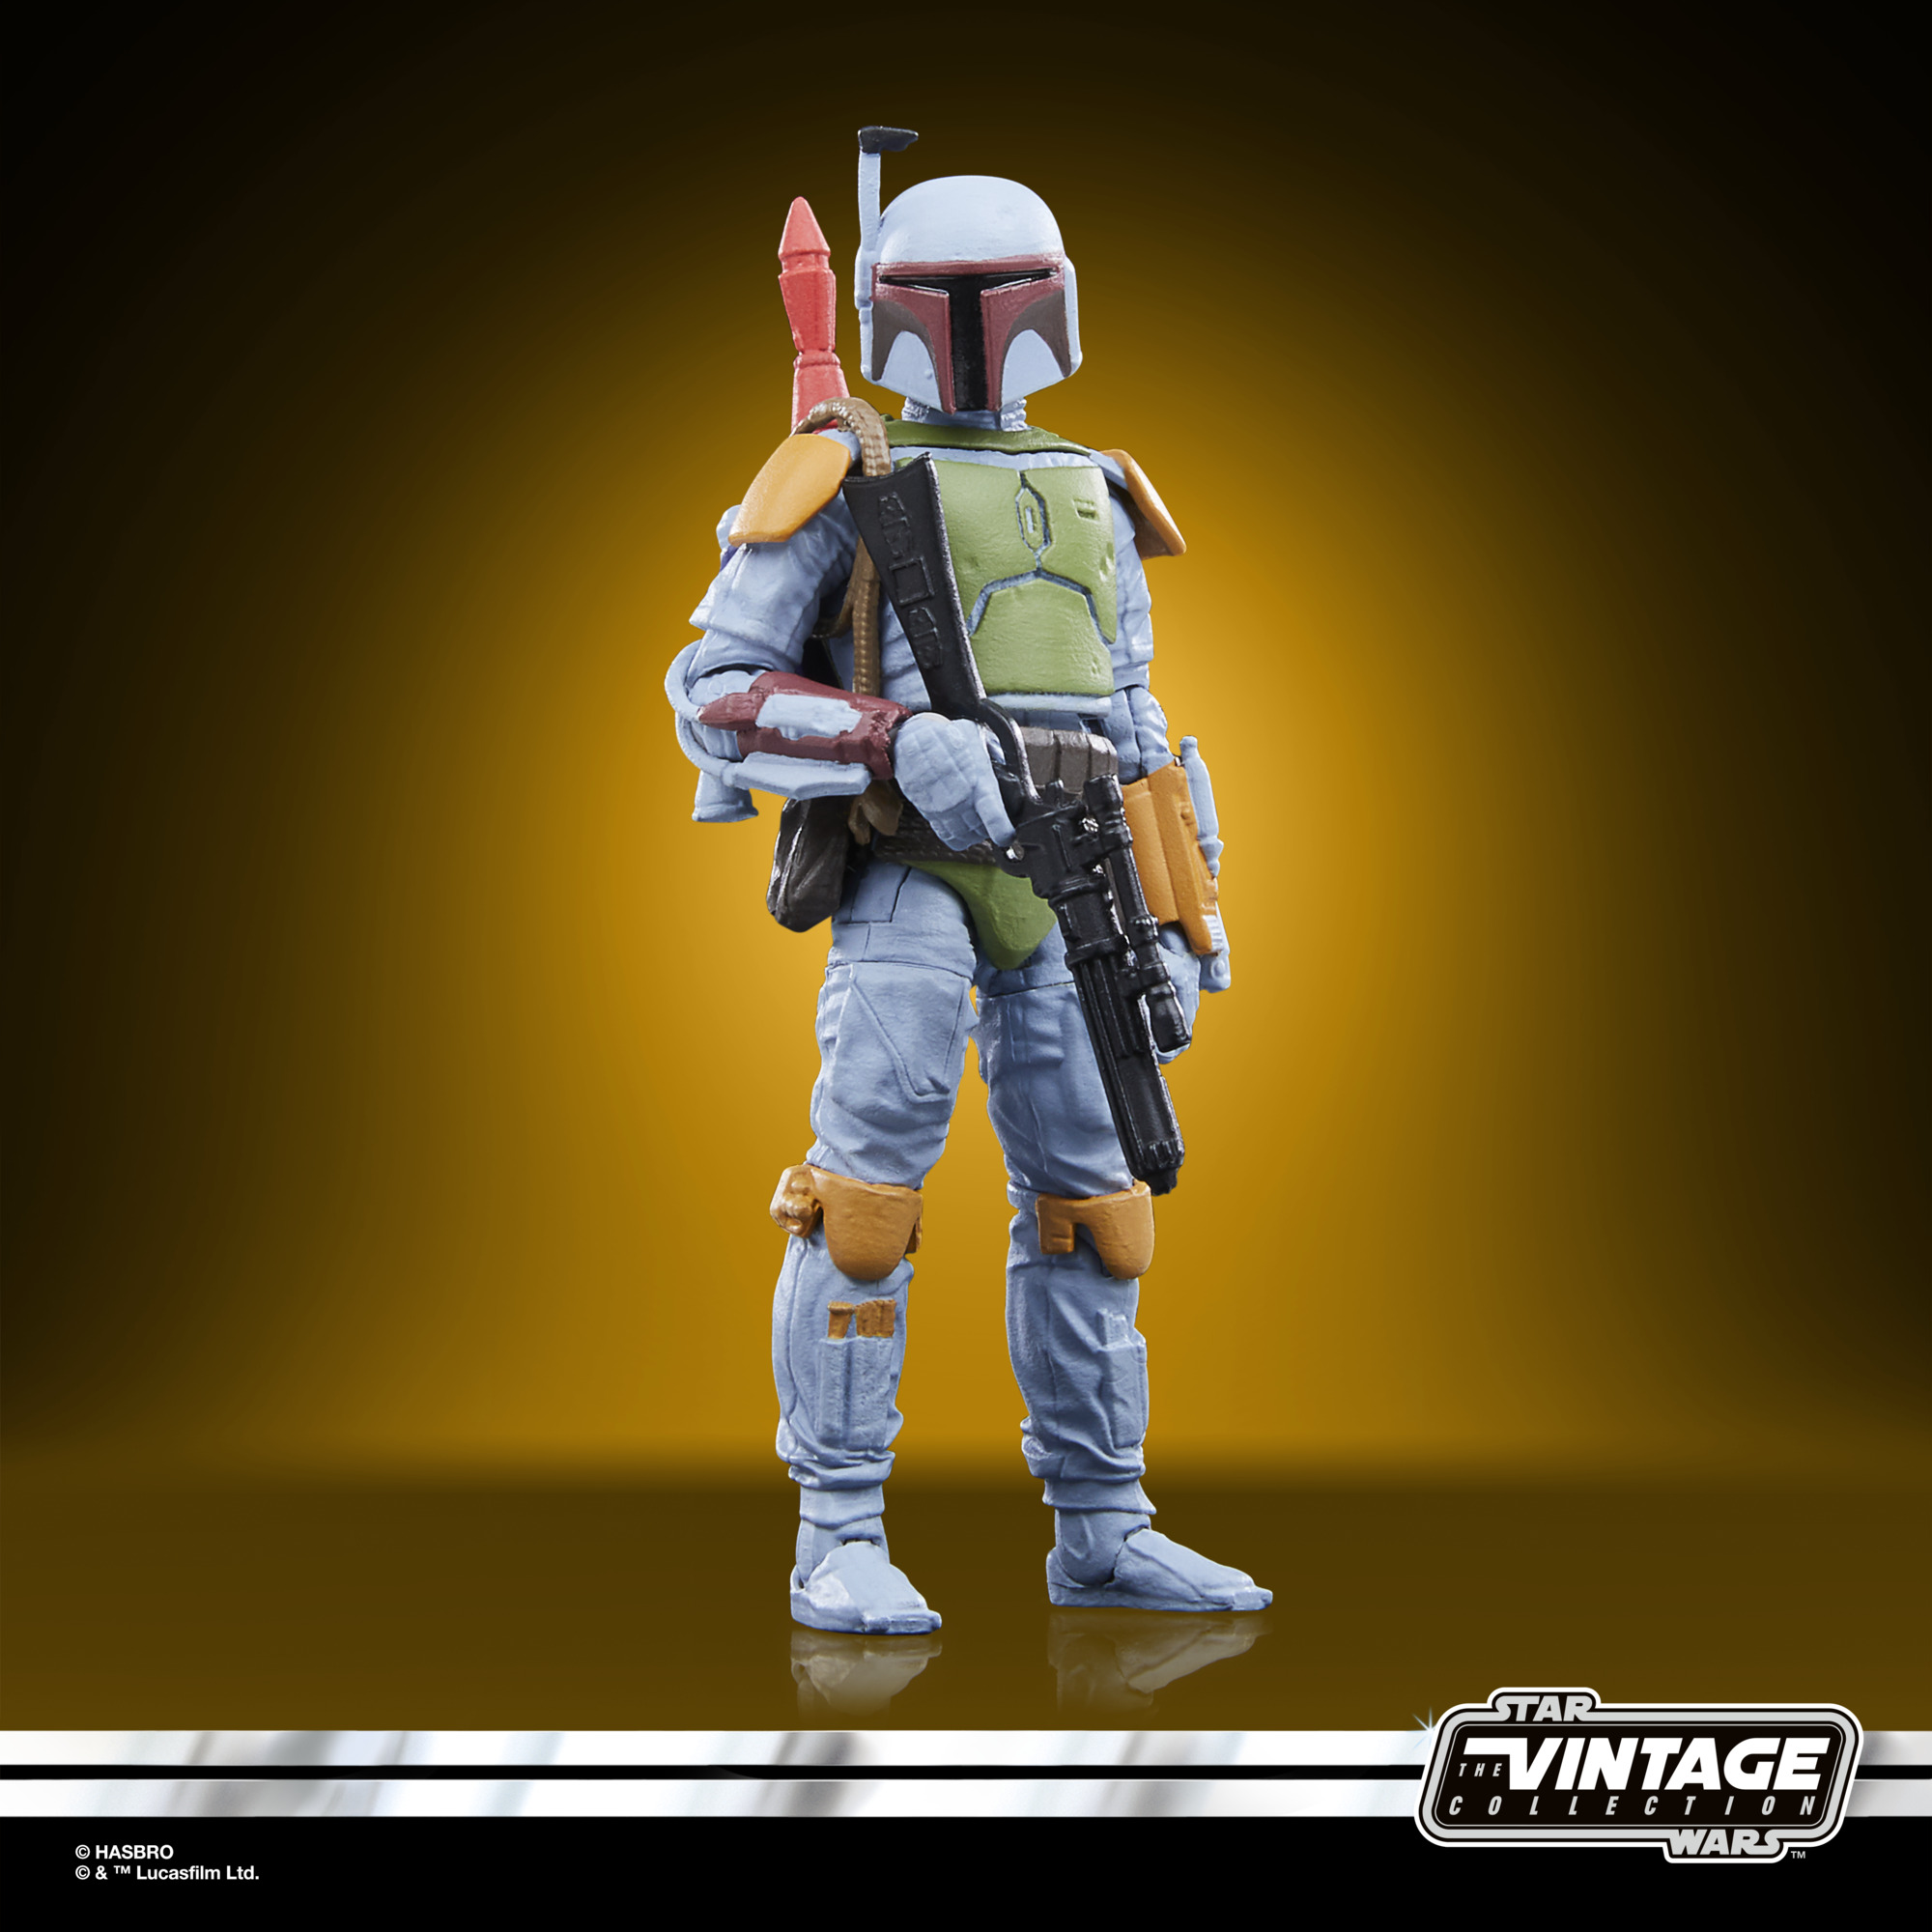 Star Wars The Vintage Collection Boba Fett Action Figures (3.75”) Exclusive F80695L2 5010996165725